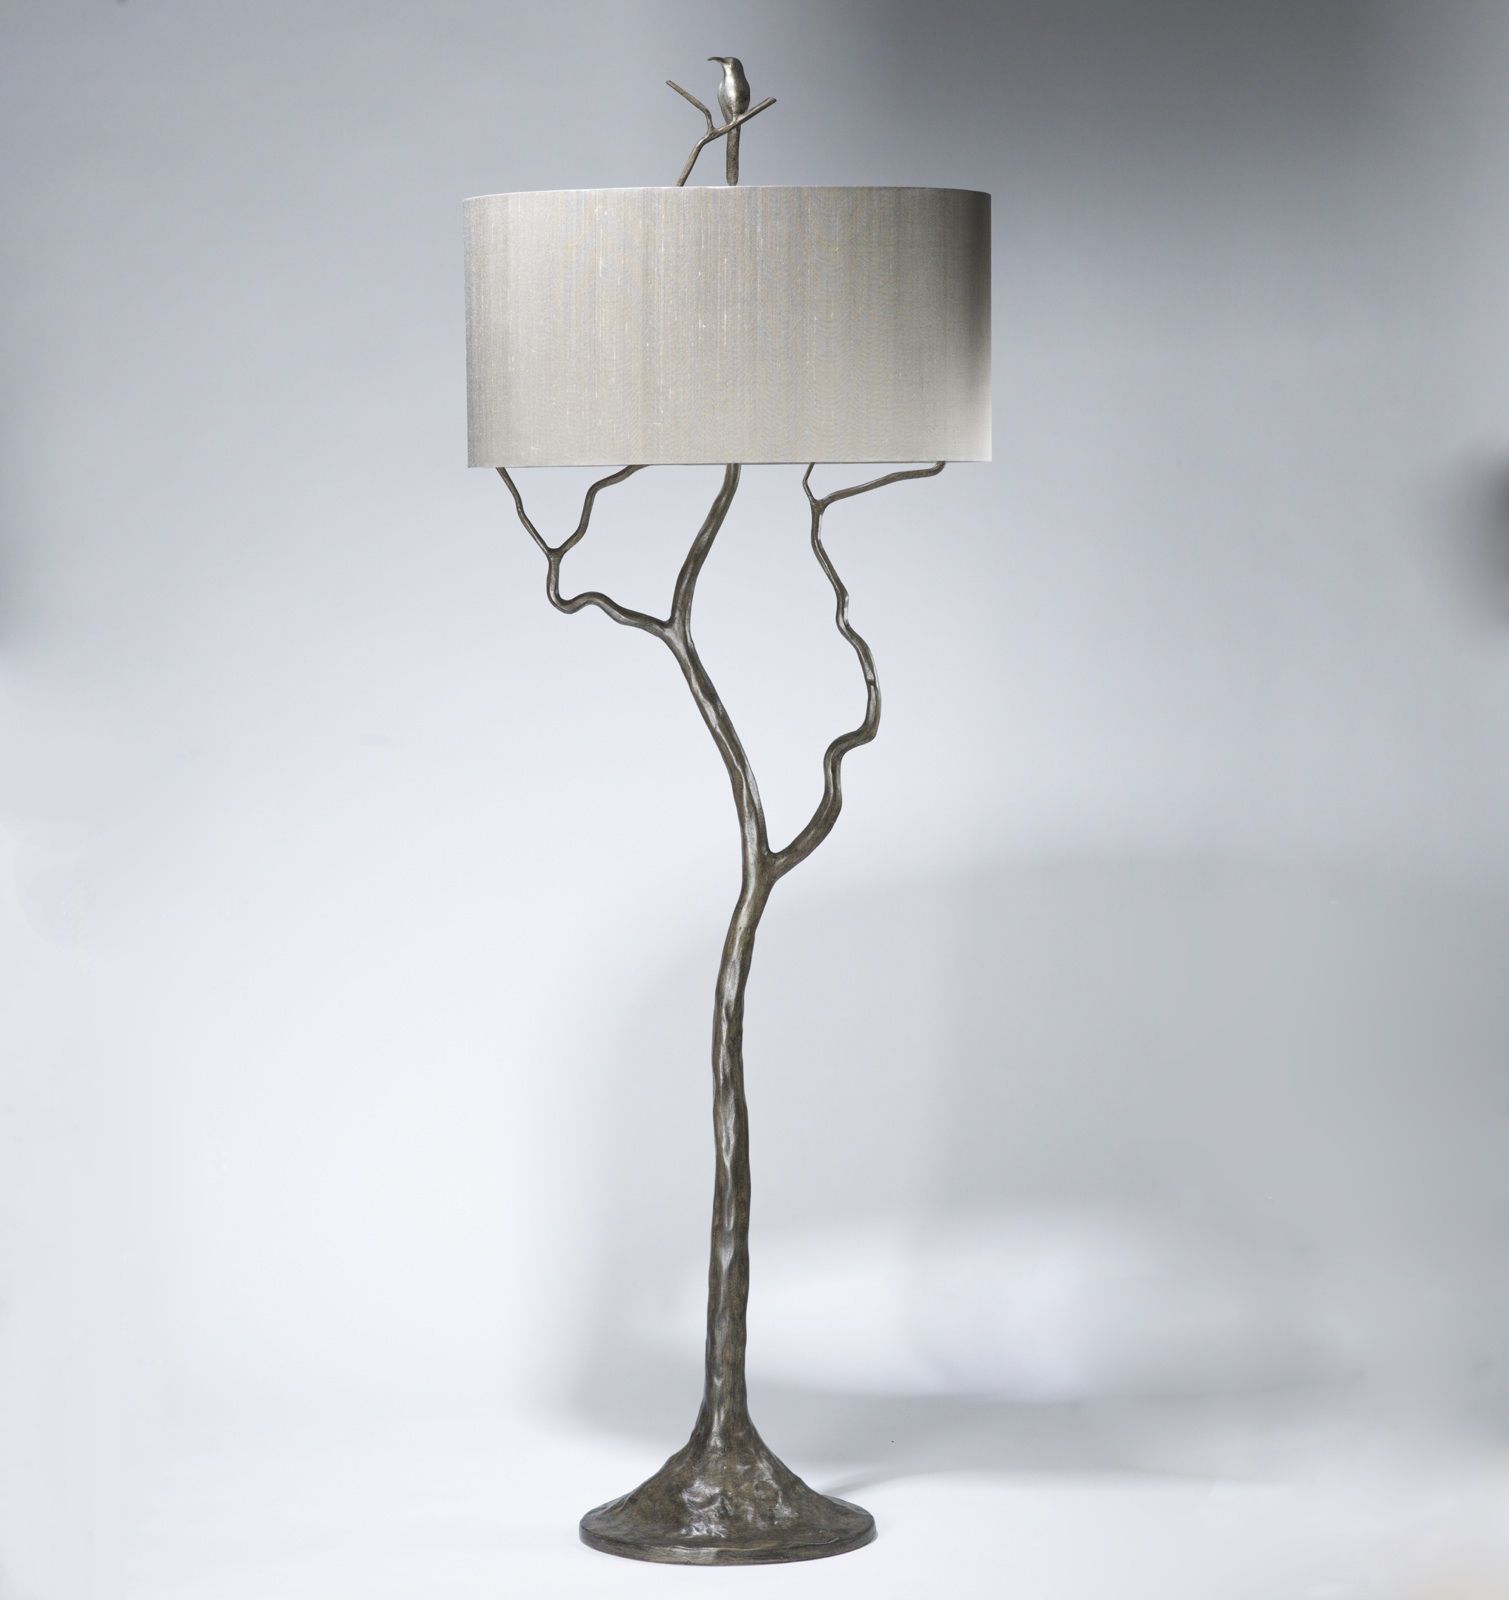 Tall Tree & Humming Bird Floor Lamp In Grey Painted Pewter, Distressed  Silver Leaf Finish (t3598) – Tyson – Decorative Lighting And Bespoke  Furniture Within Silver Floor Lamps (View 14 of 15)